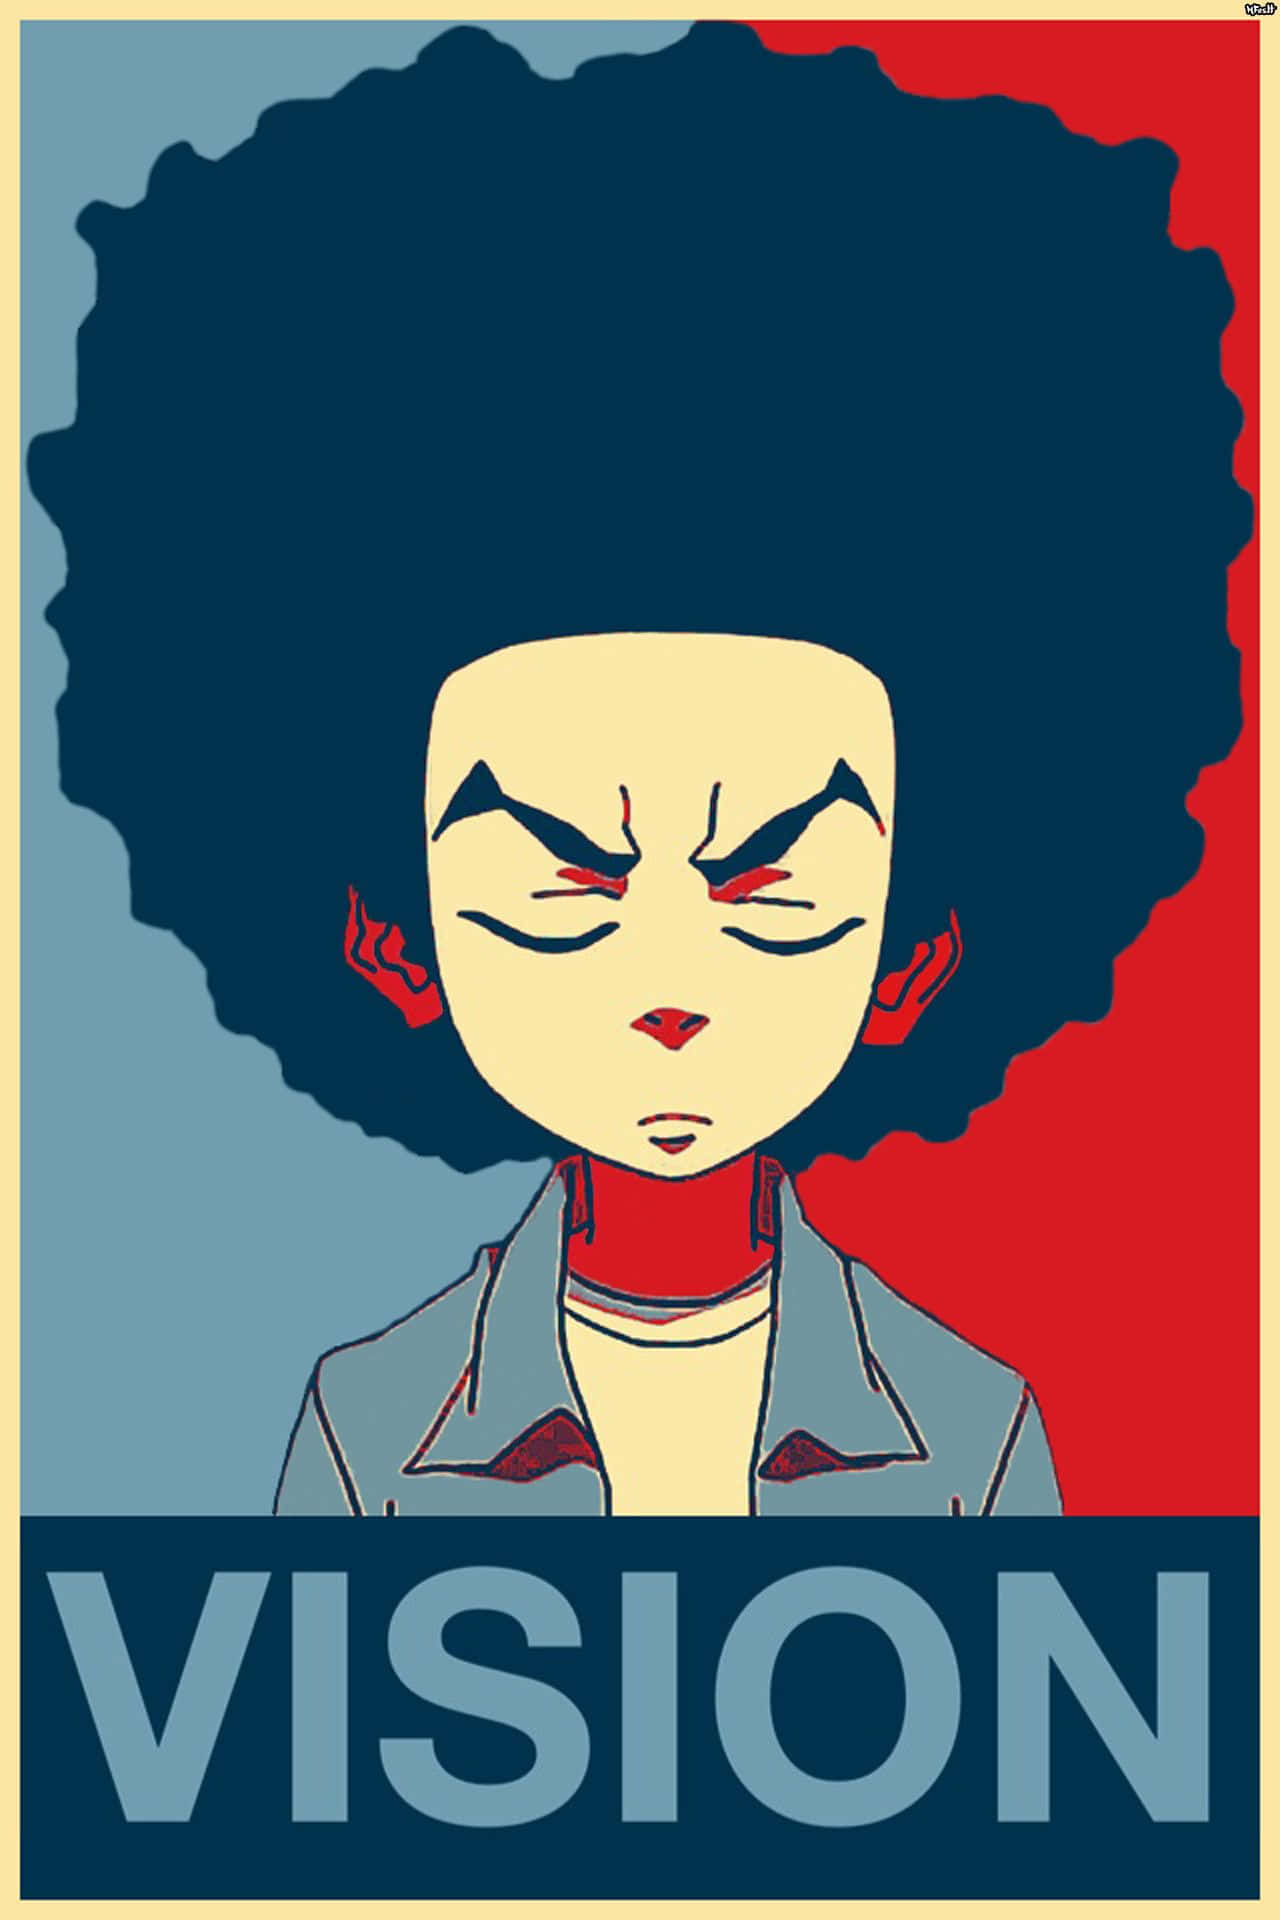 "A Sophisticated Design From Boondocks Bape - Ready To Make a Statement!" Wallpaper